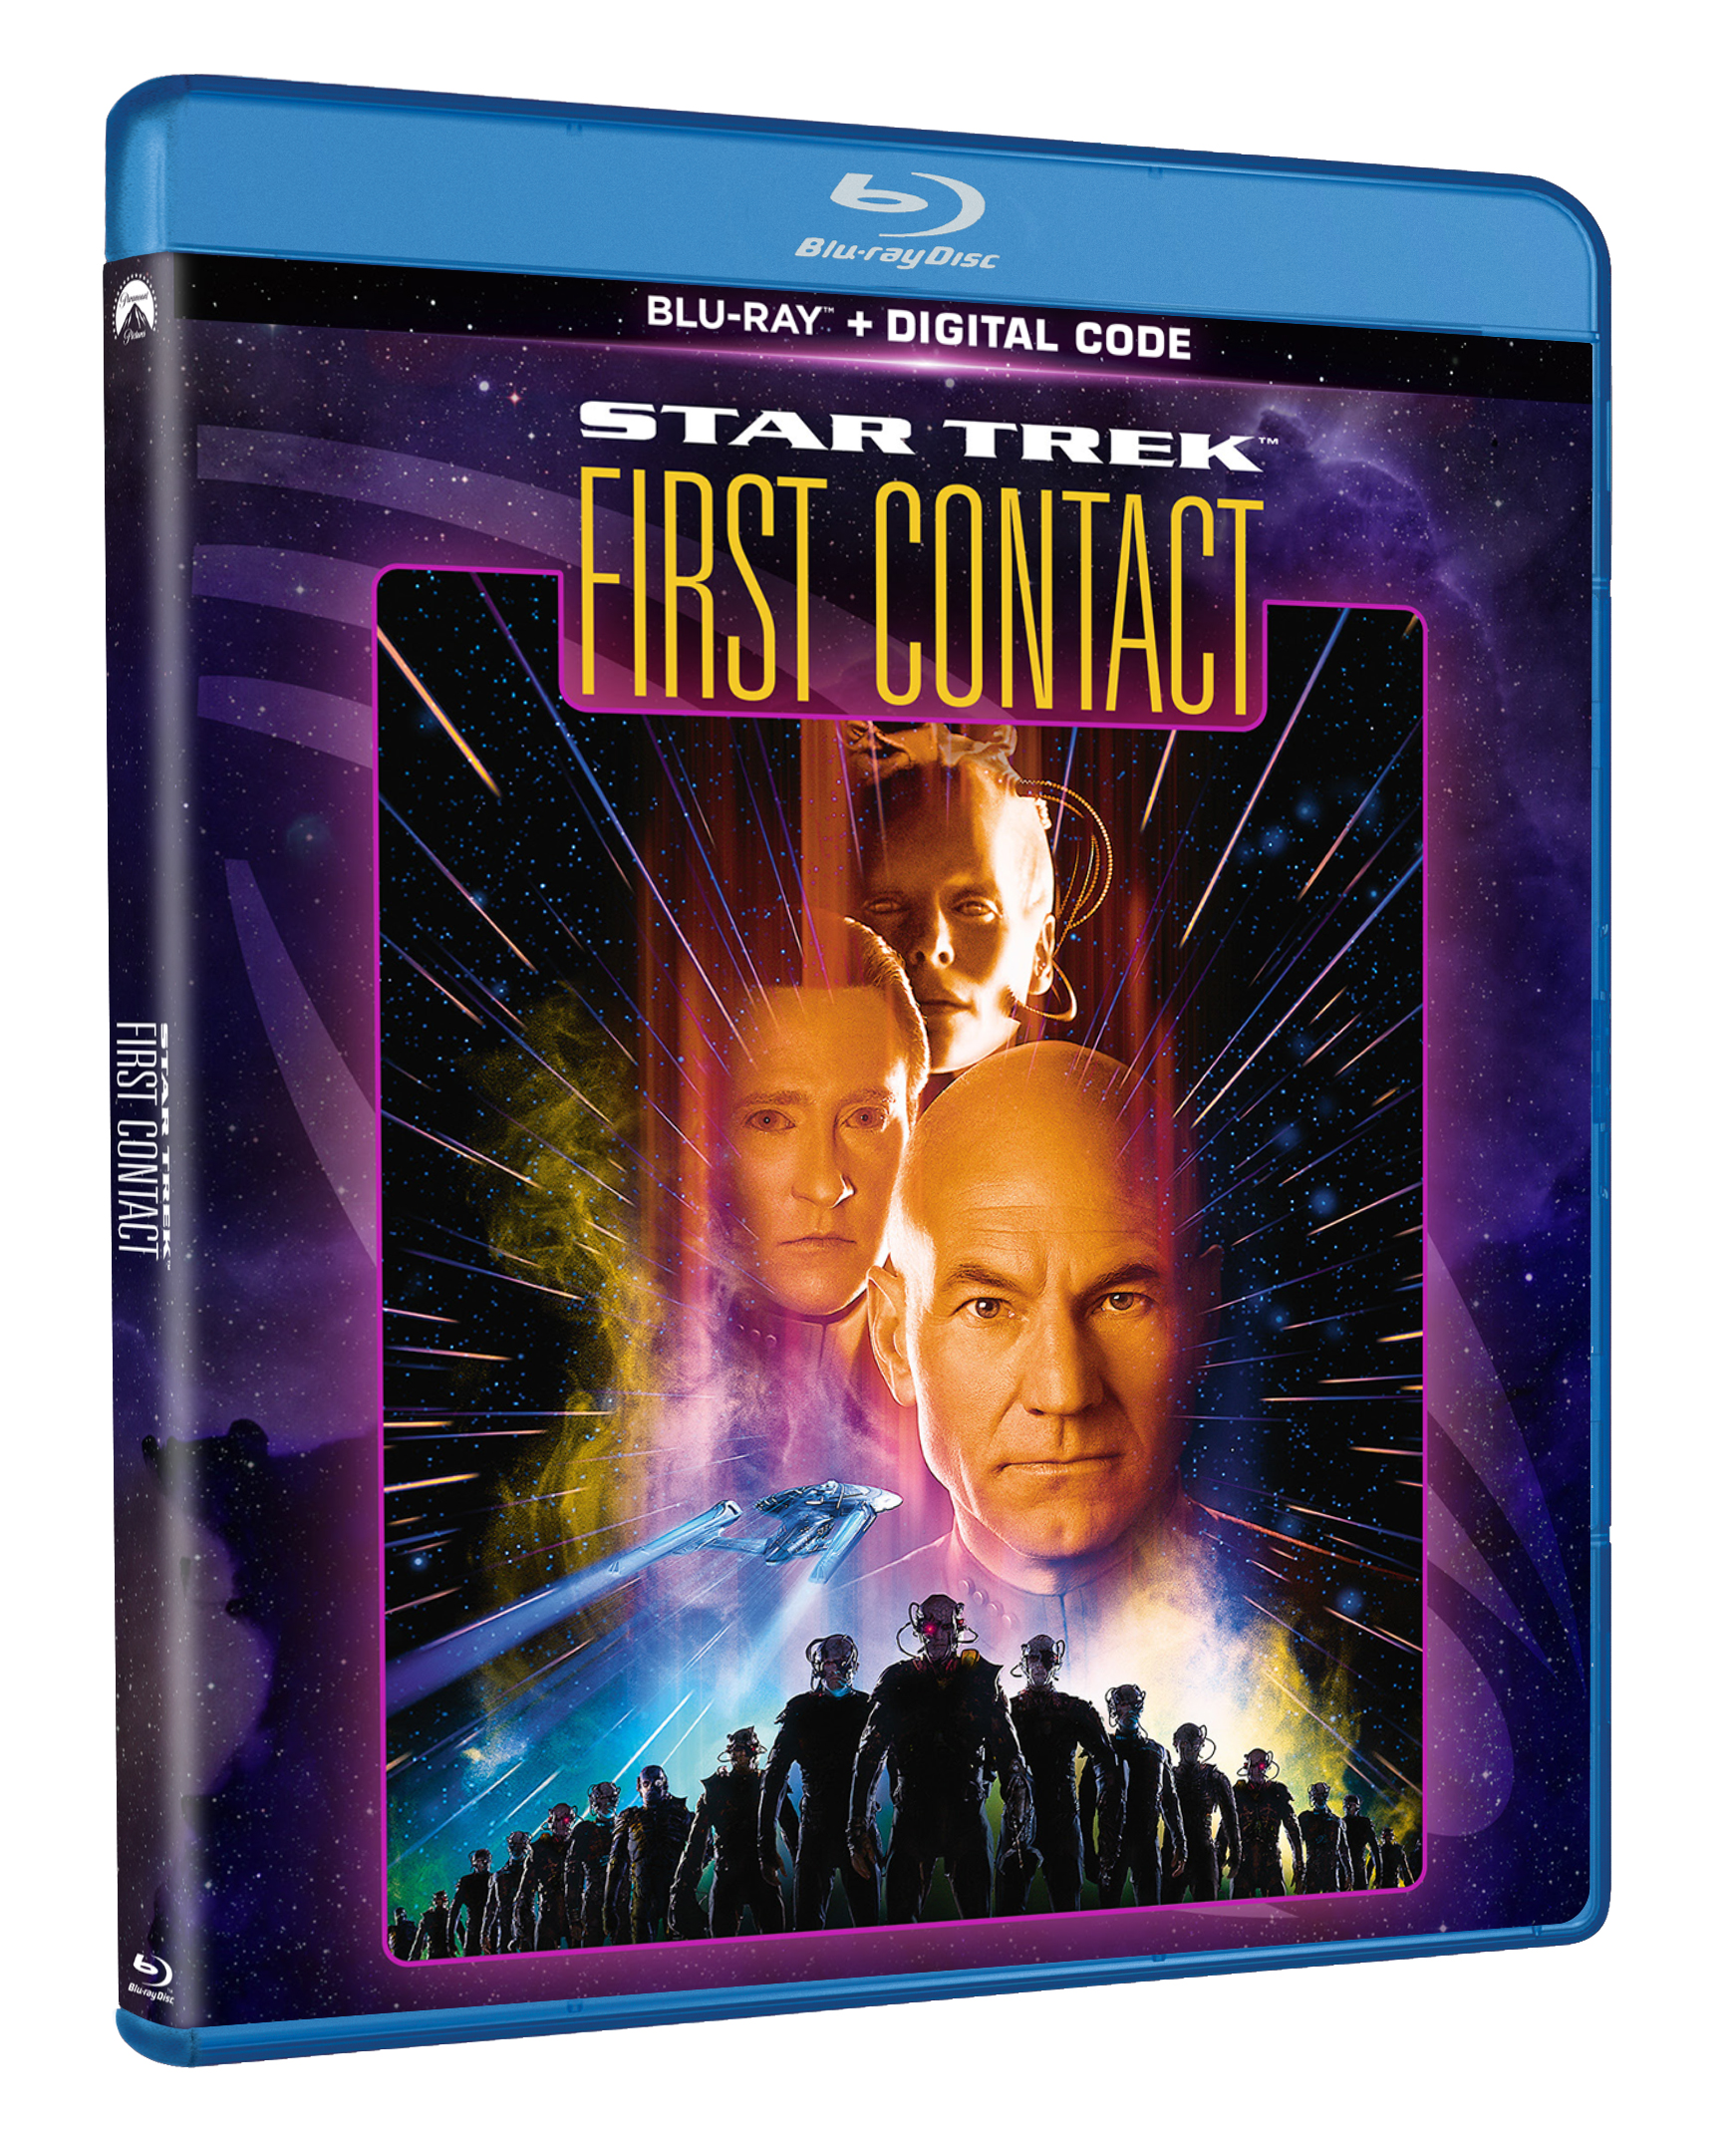 Star Trek: The Next Generation 4-Movie 4K Blu-ray Collection Is 37